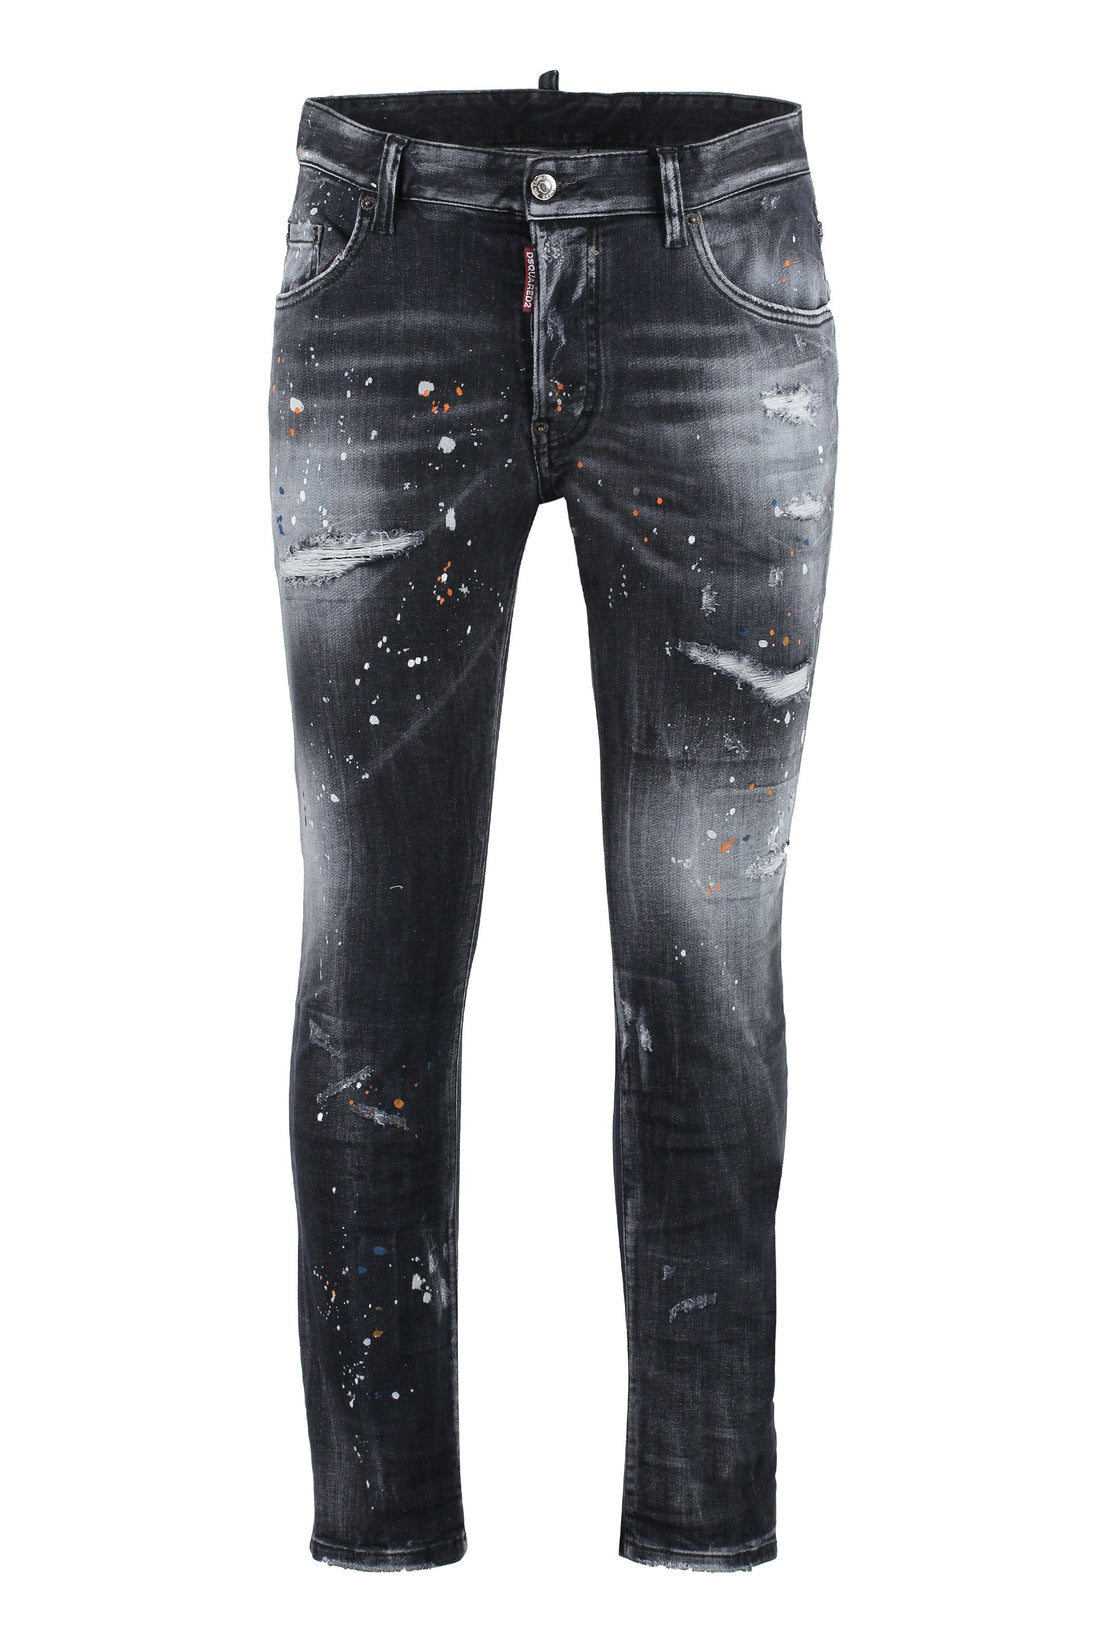 Dsquared2-OUTLET-SALE-Super Twinky skinny jeans-ARCHIVIST